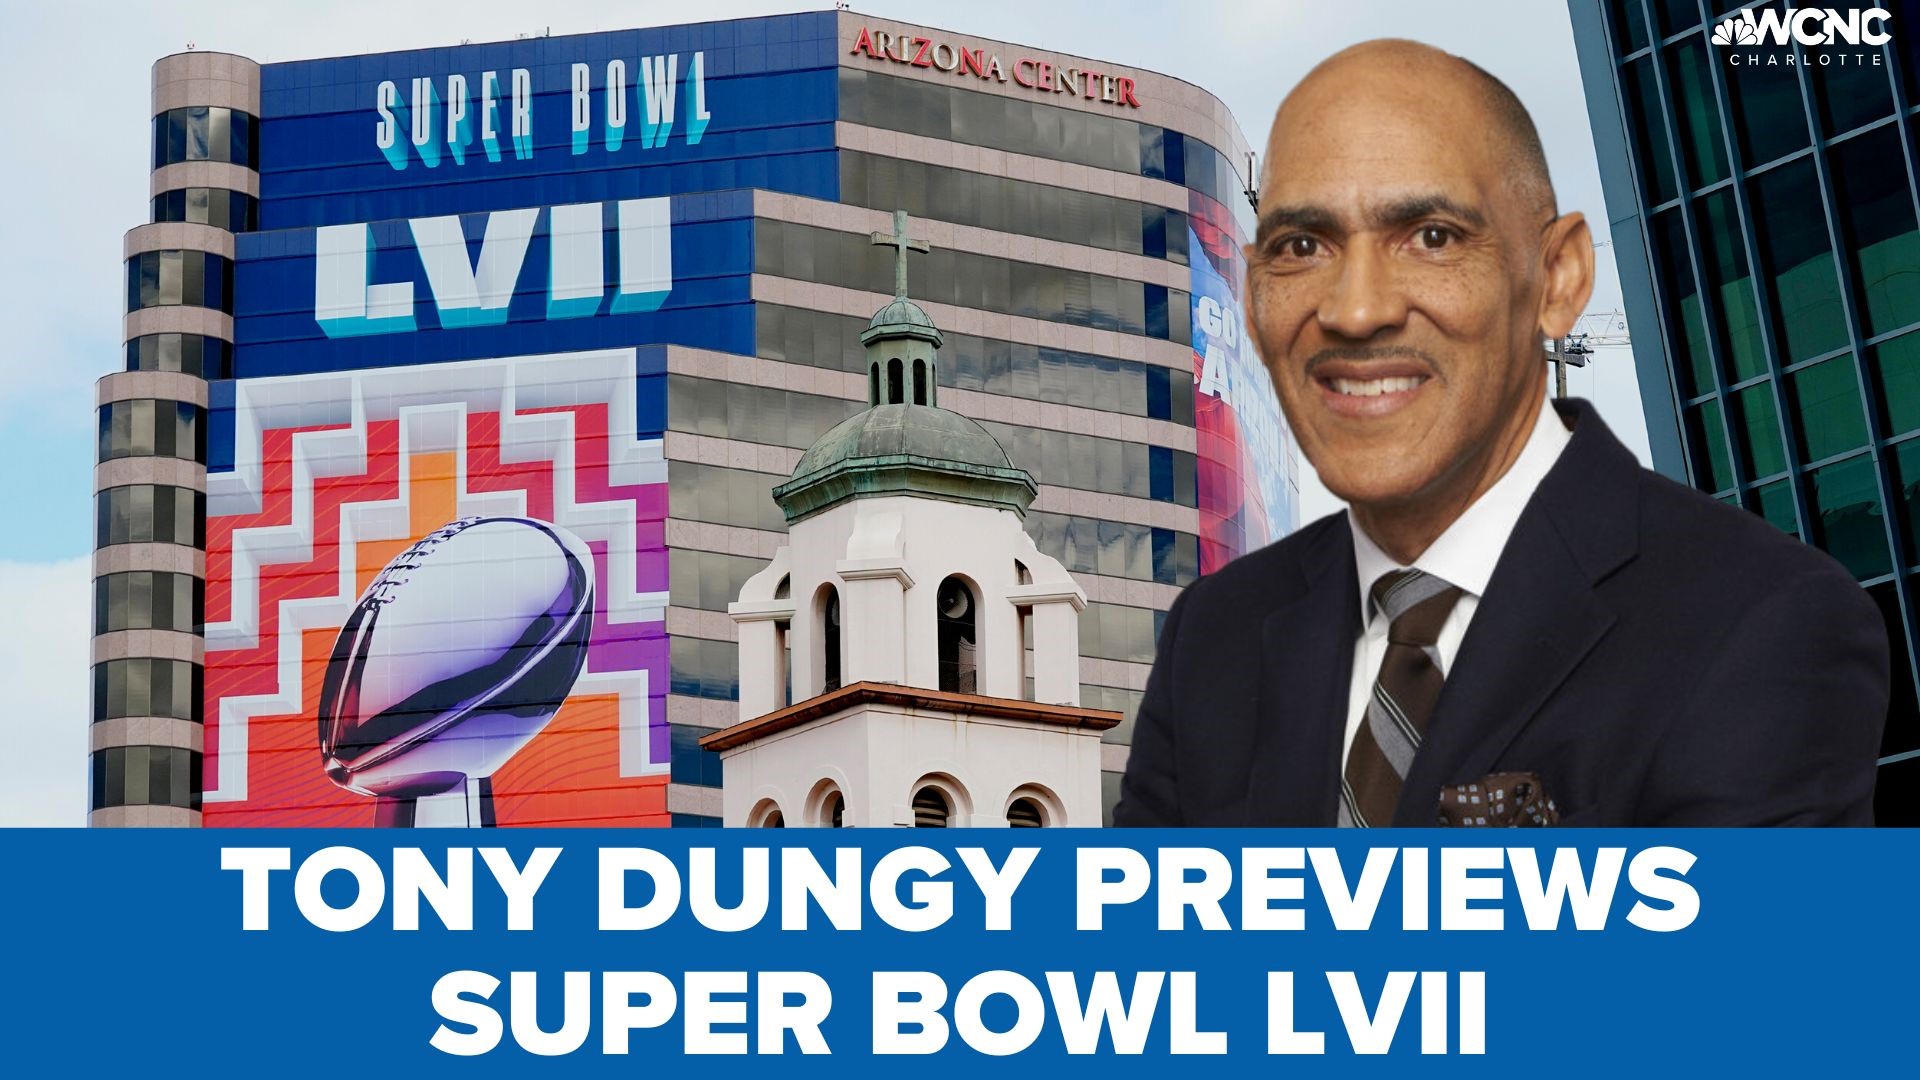 Super Bowl champion and Pro Football Hall of Famer Tony Dungy previews Super Bowl 57 between the Philadelphia Eagles & Kansas City Chiefs.